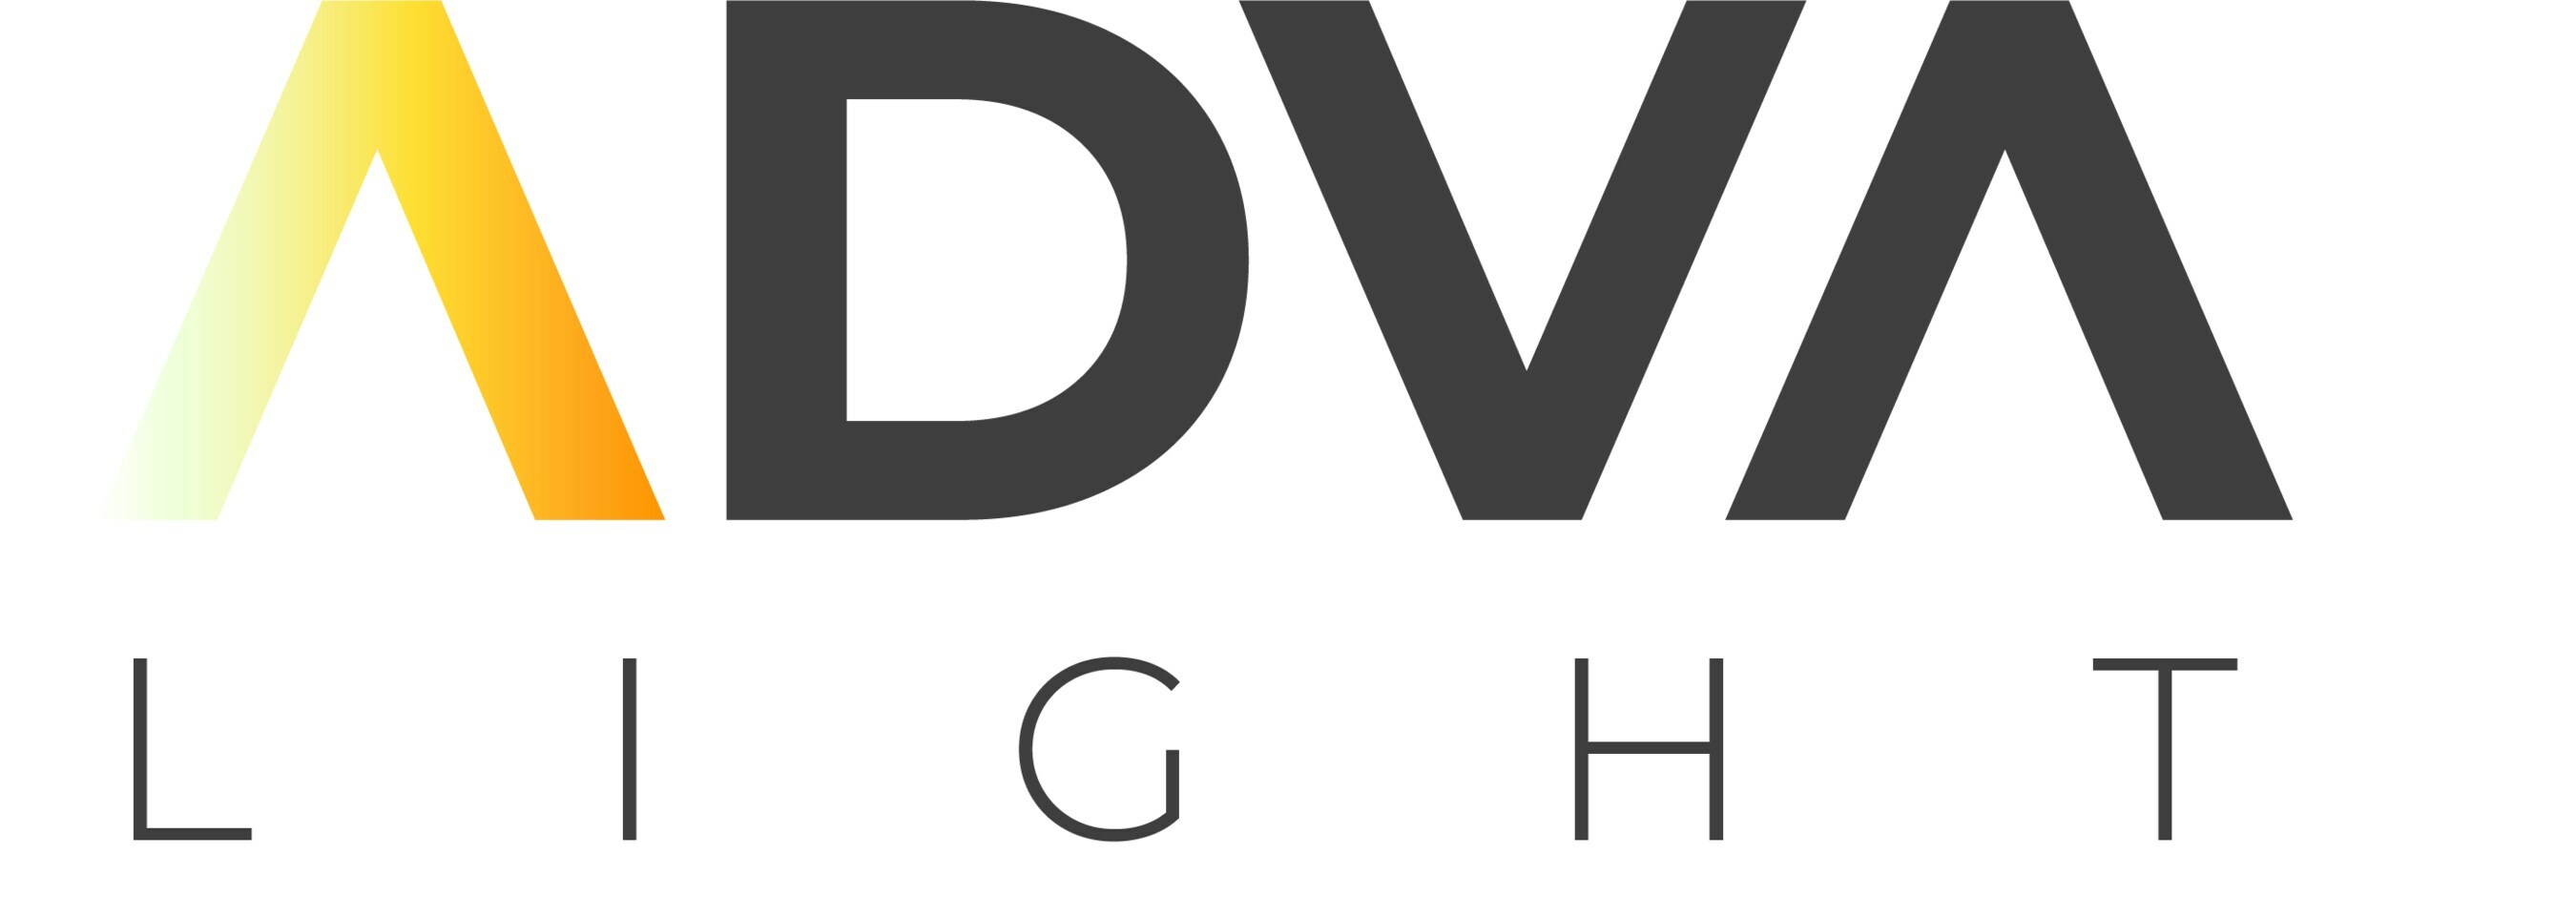 Advalight is the globally renowned company behind ADVATx, the sophisticated dual 589nm and 1319nm wavelength solid-state laser.